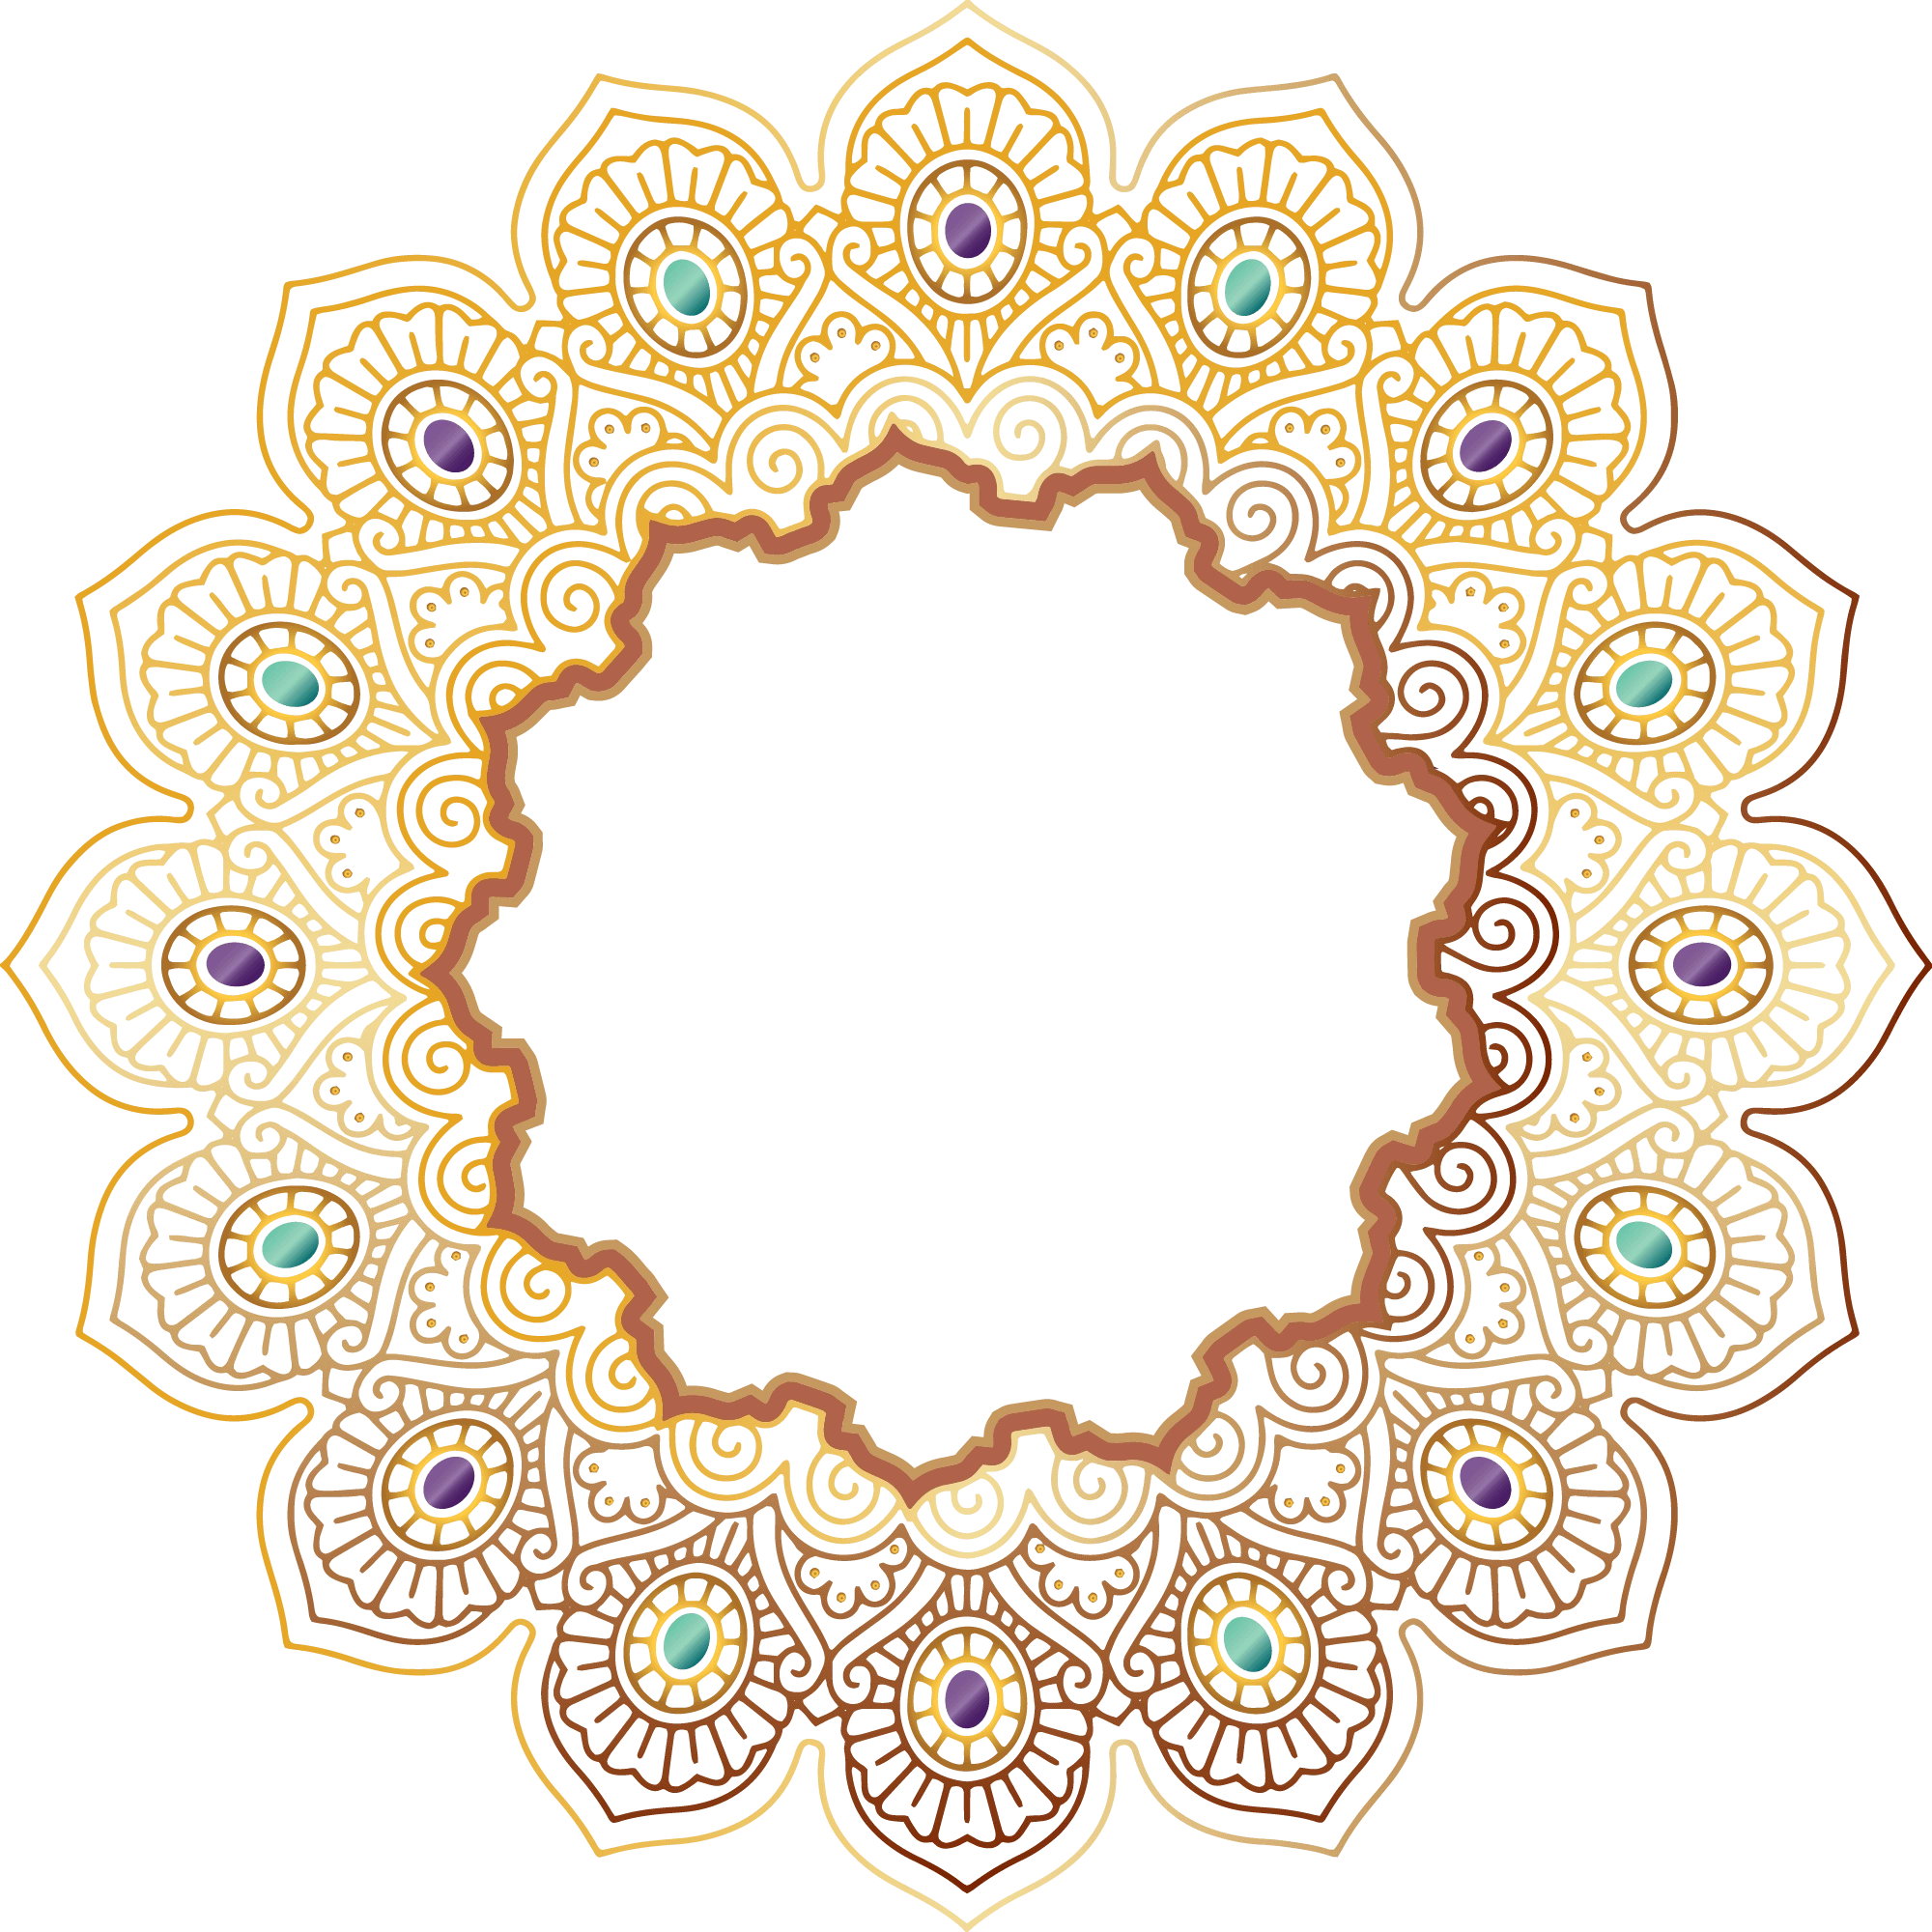 An ornate circular frame with gold ornaments on a black background, created by the Chinese Metaphysics Academy in 2024.